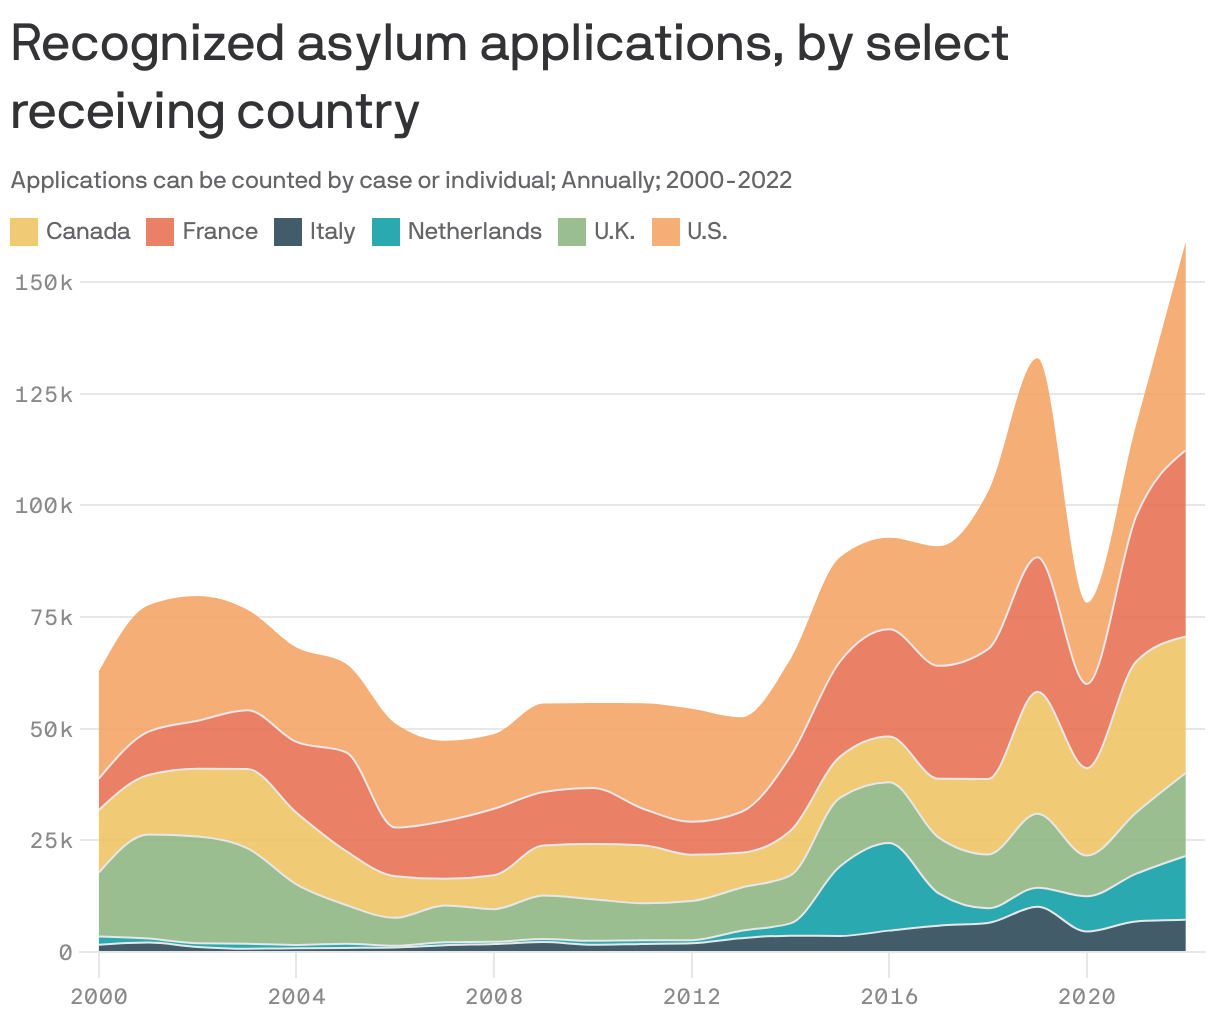 Recognized asylum applications, by select receiving country